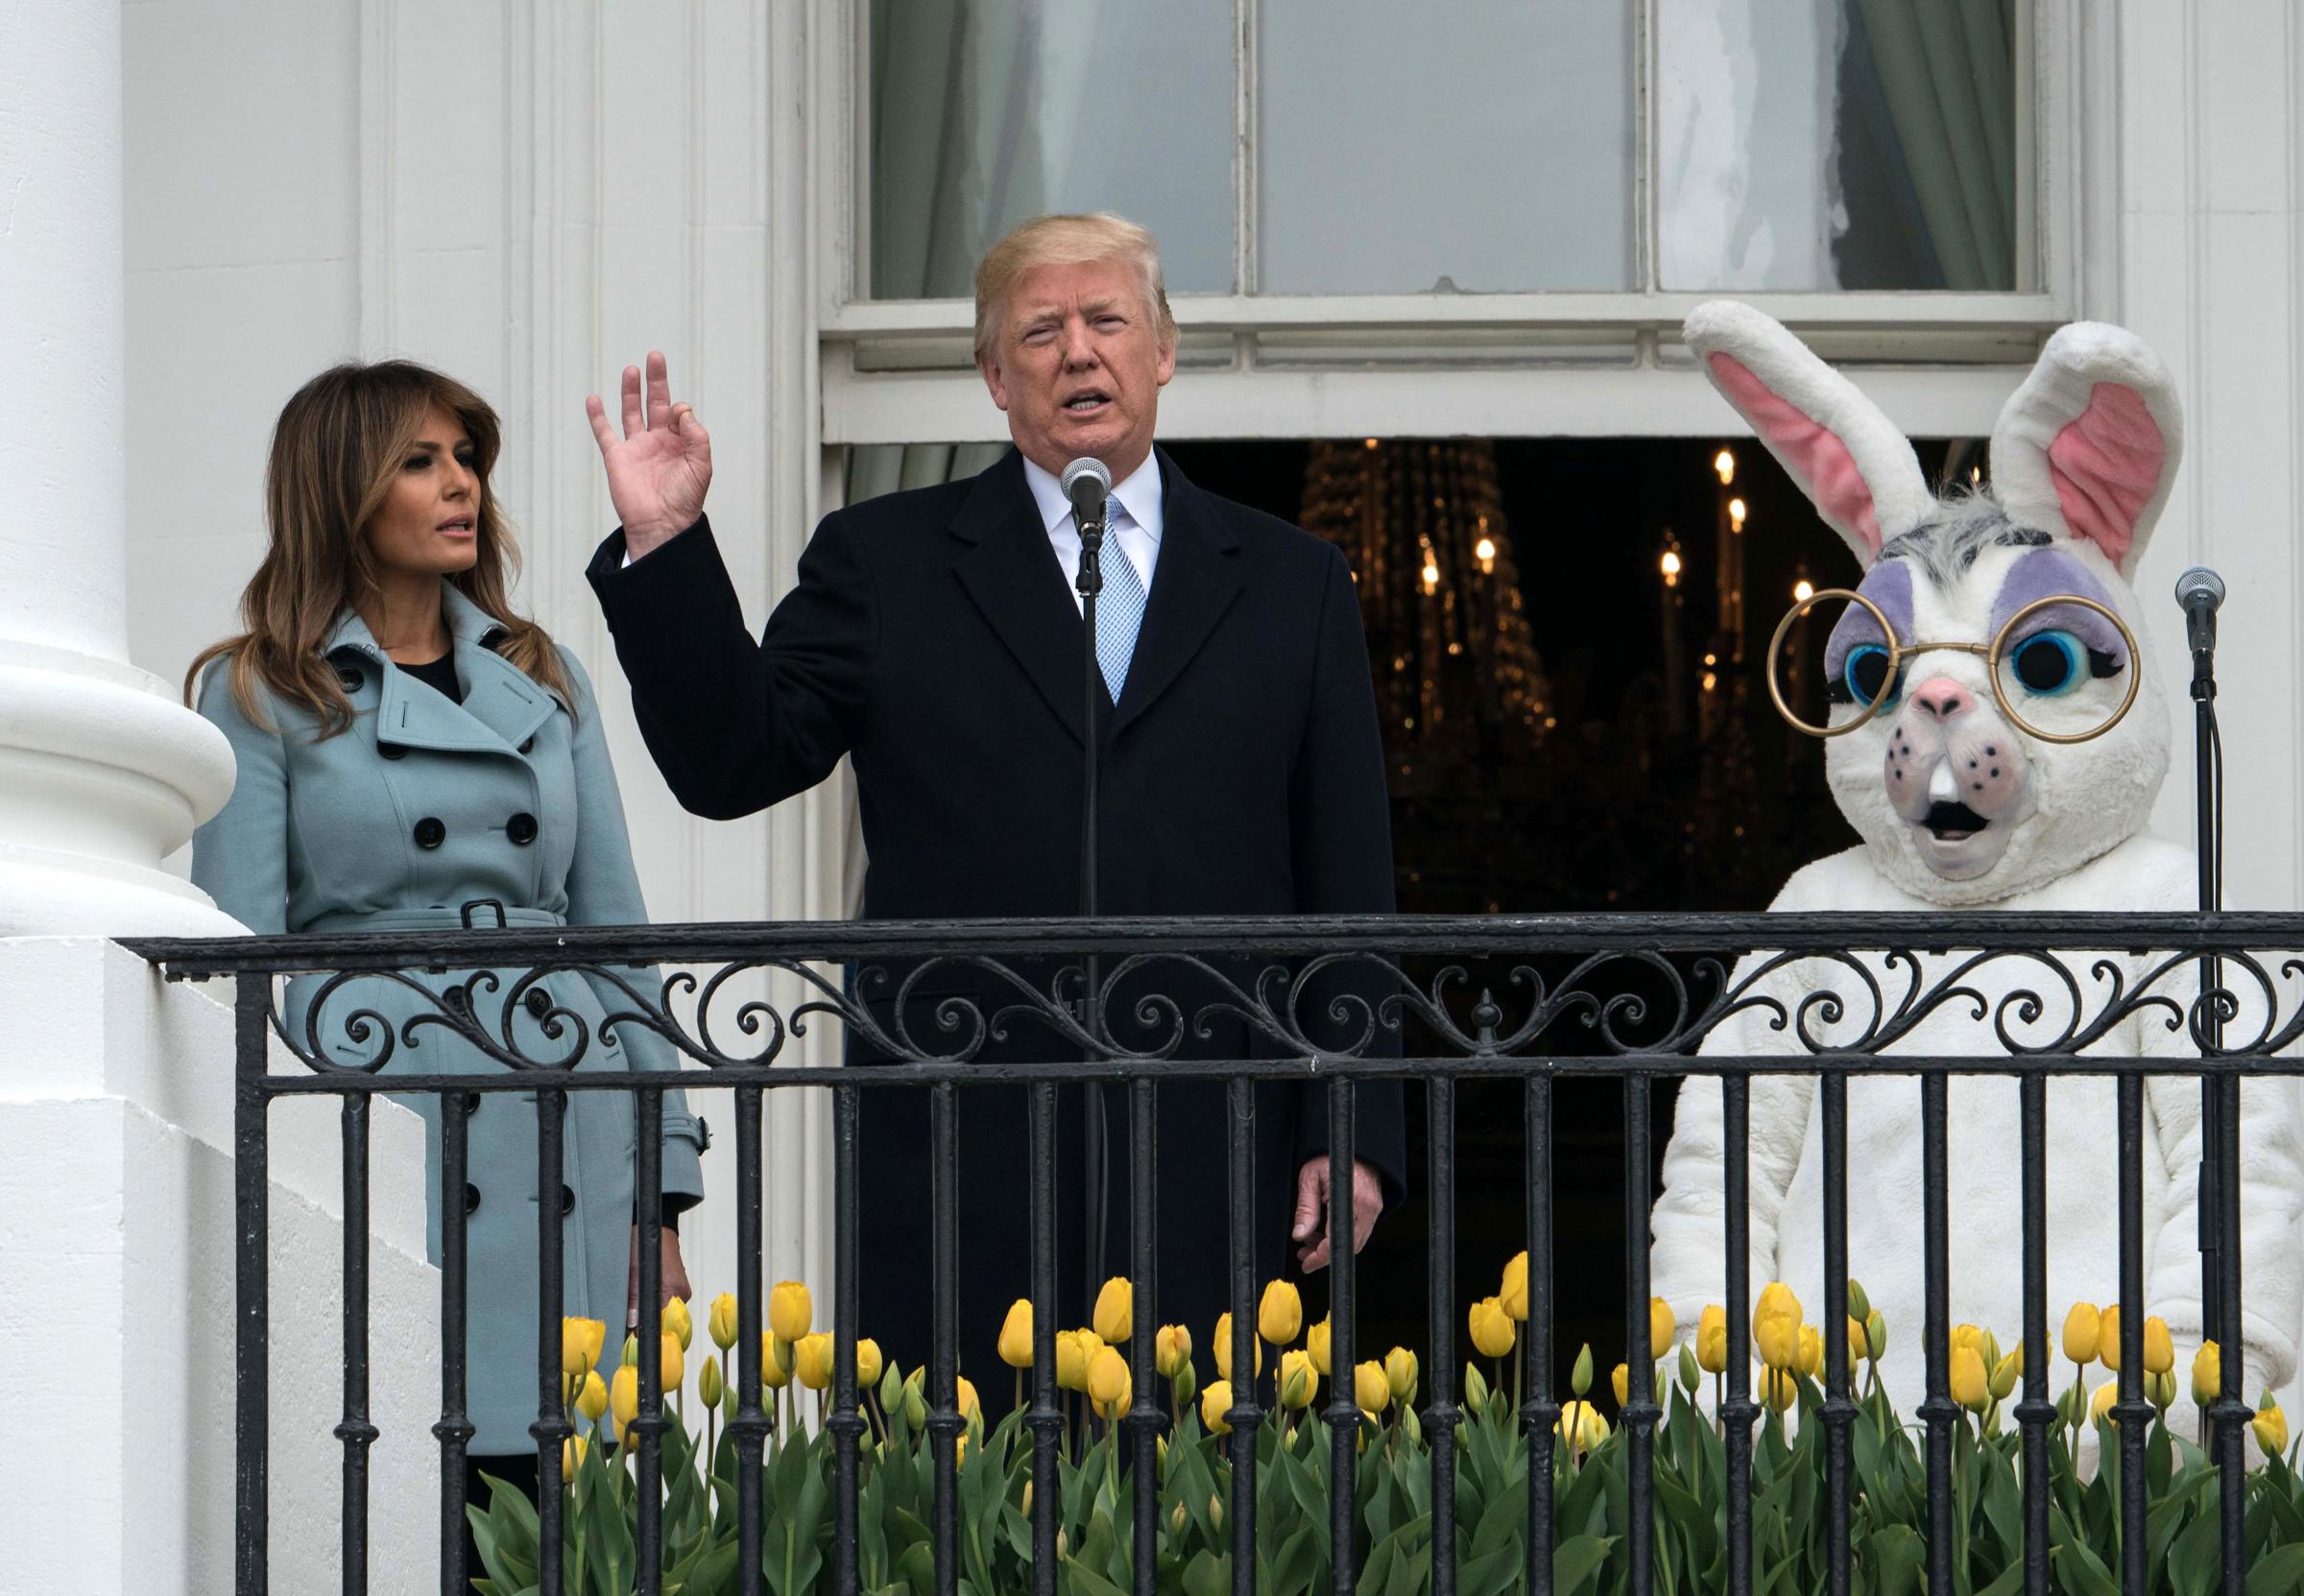 Donald Trump at the White House Easter Egg Roll